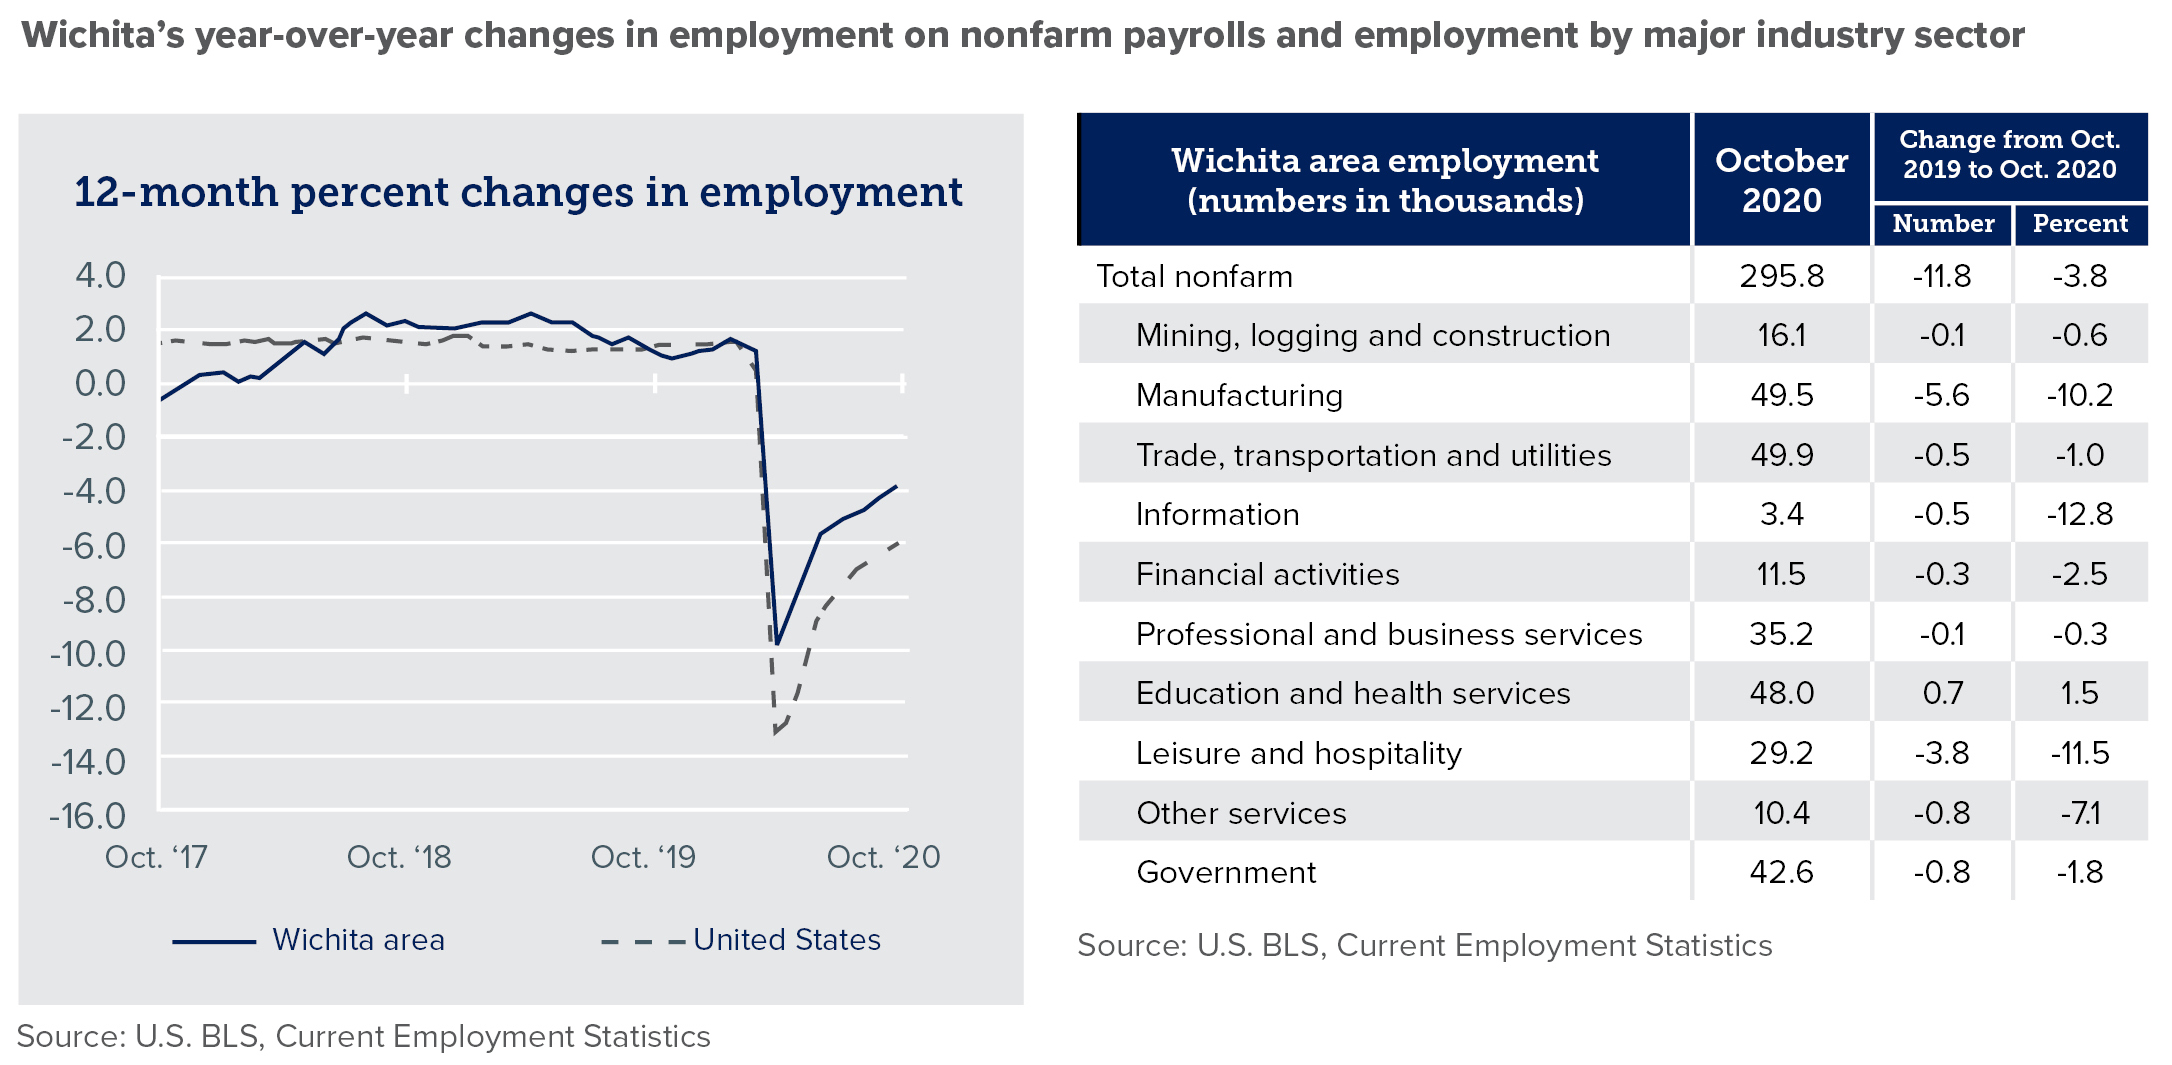 Wichita's year-over-year changes in employment on nonfarm payrolls and employment by major industry sector